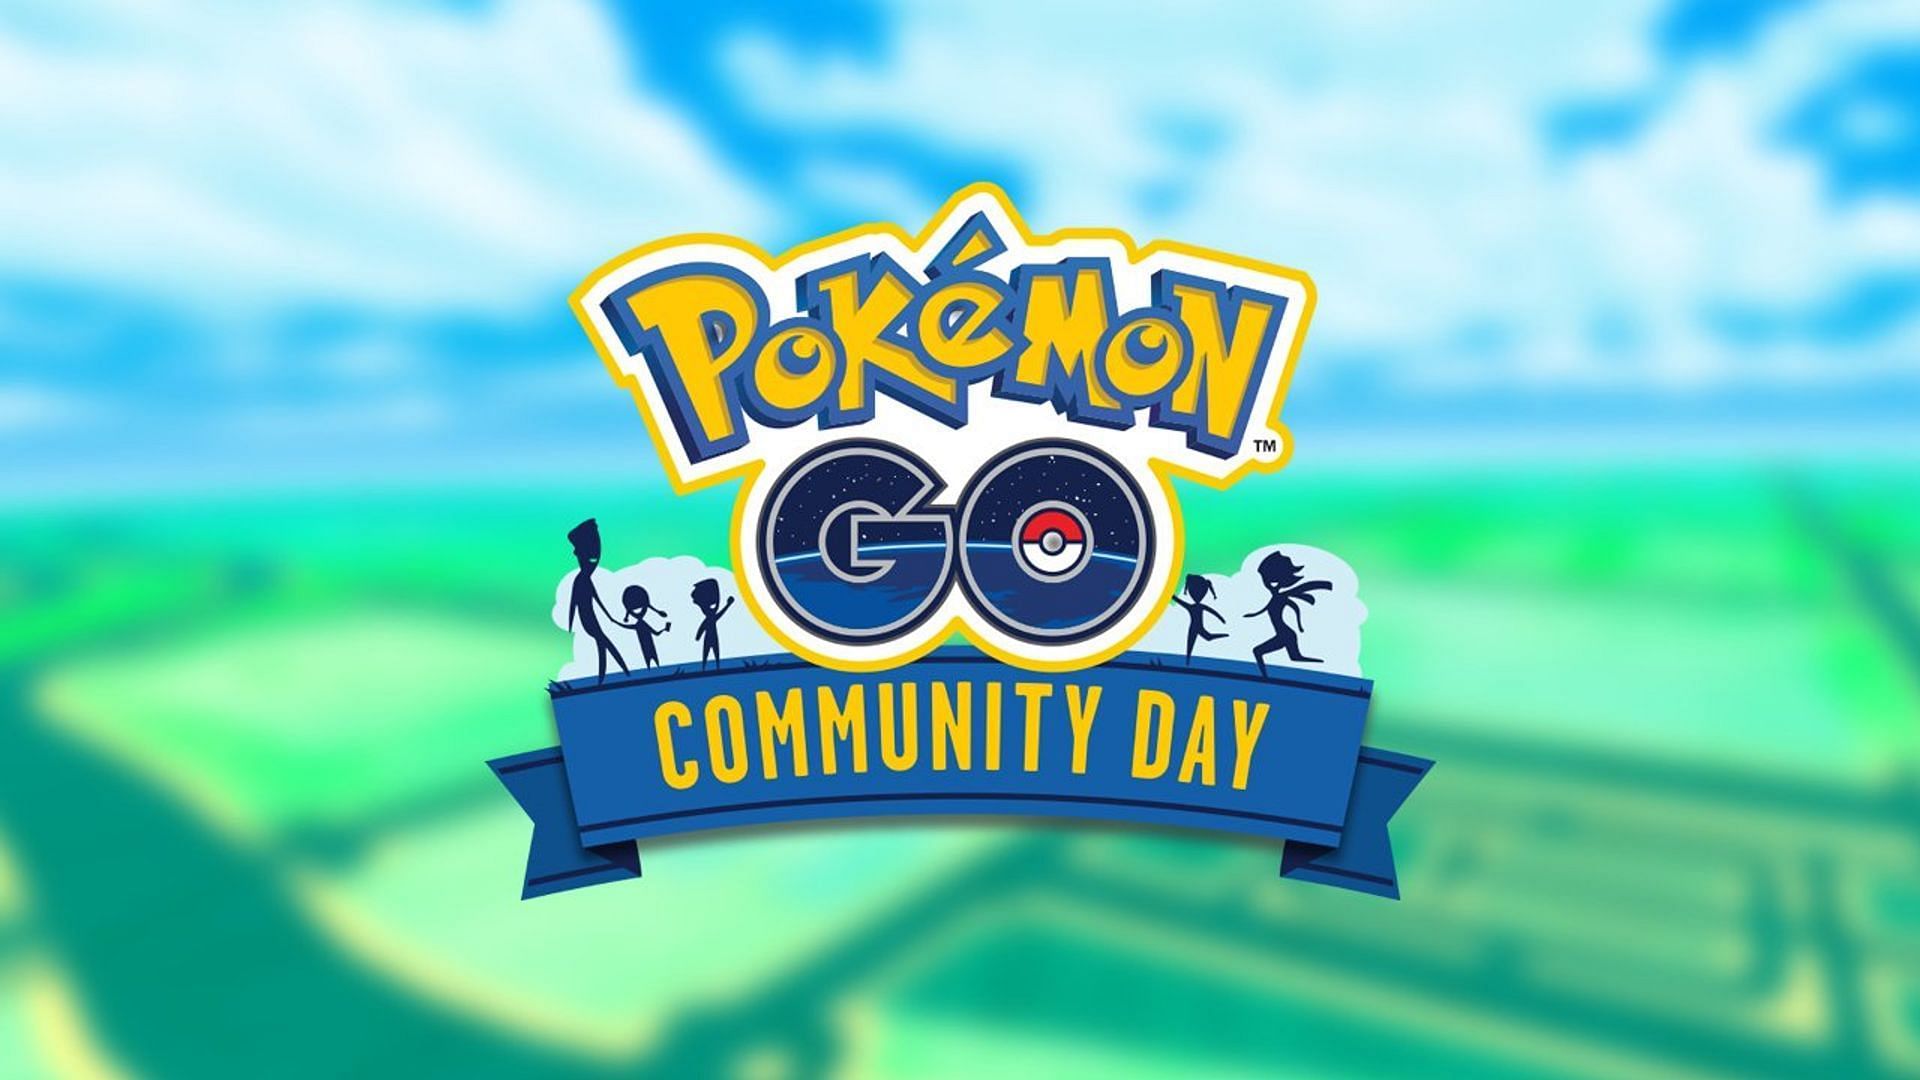 Details for Pokemon GO&#039;s June 2022 Community Day have been scarce, but this has not stopped players from speculating (Image via Niantic)